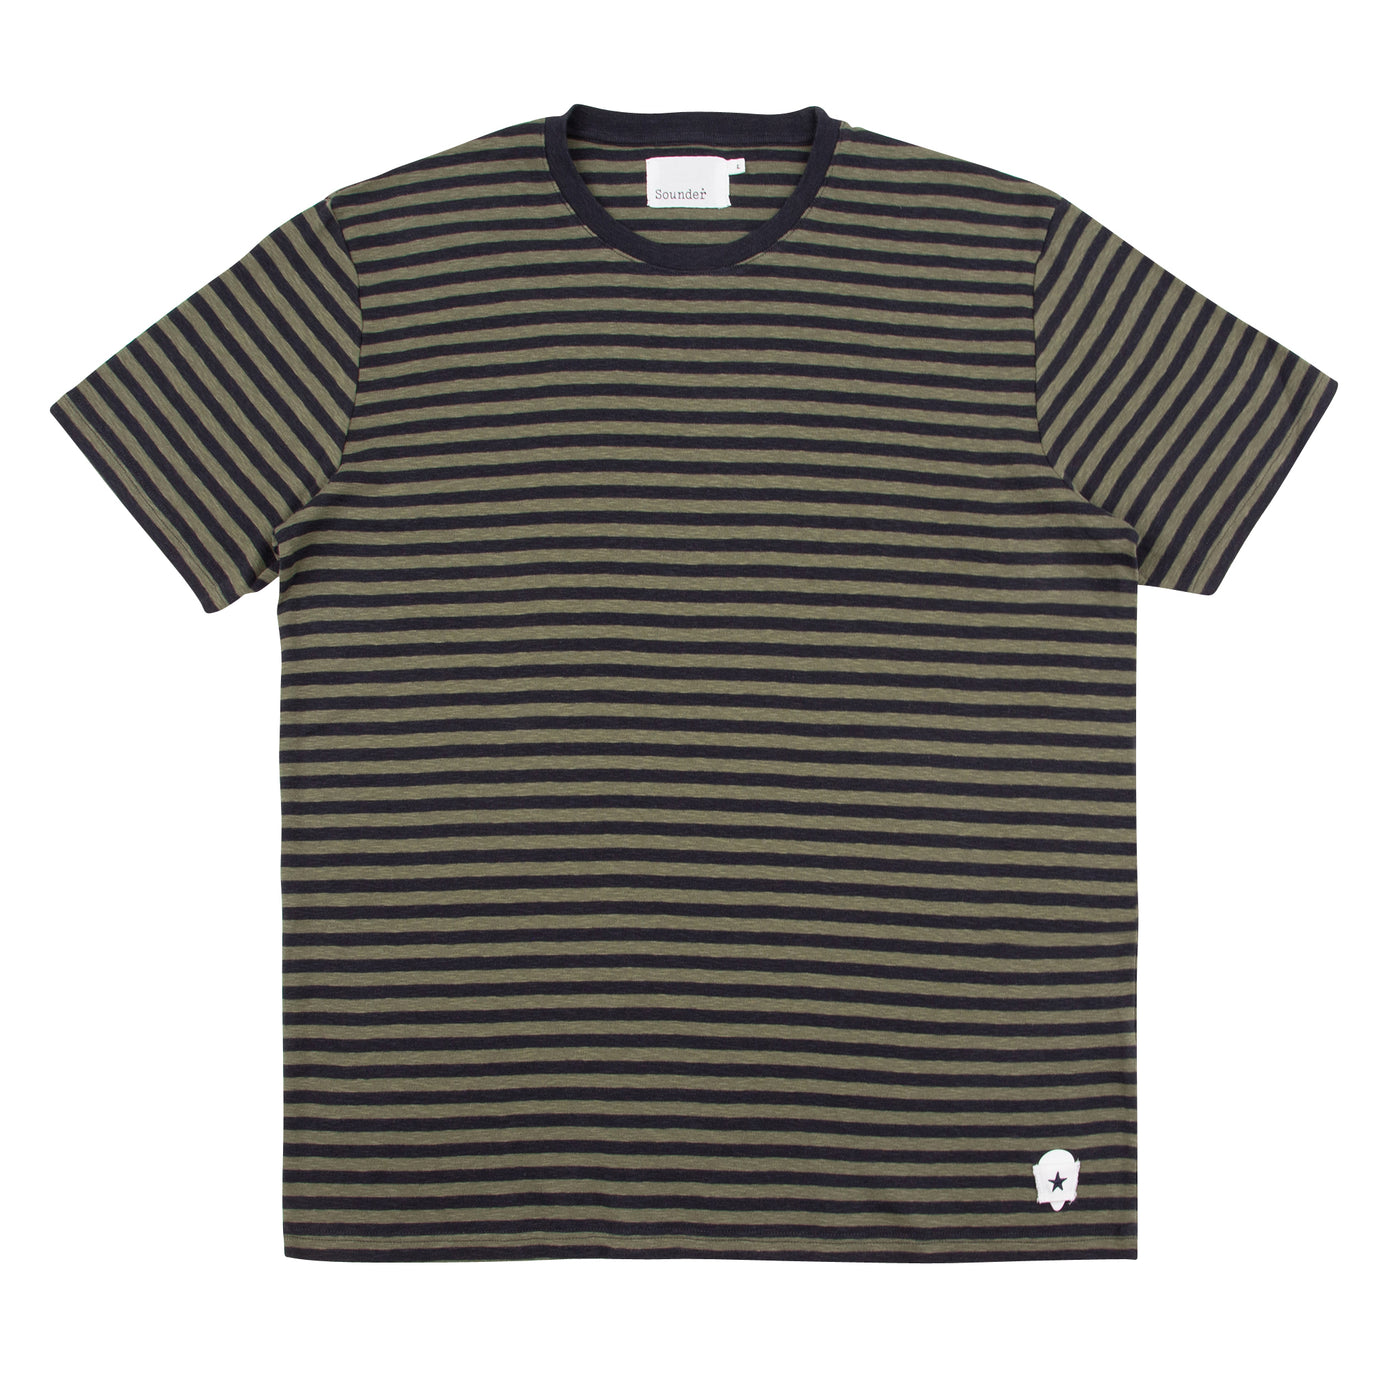 Stripe T-Shirt in Olive and Charcoal